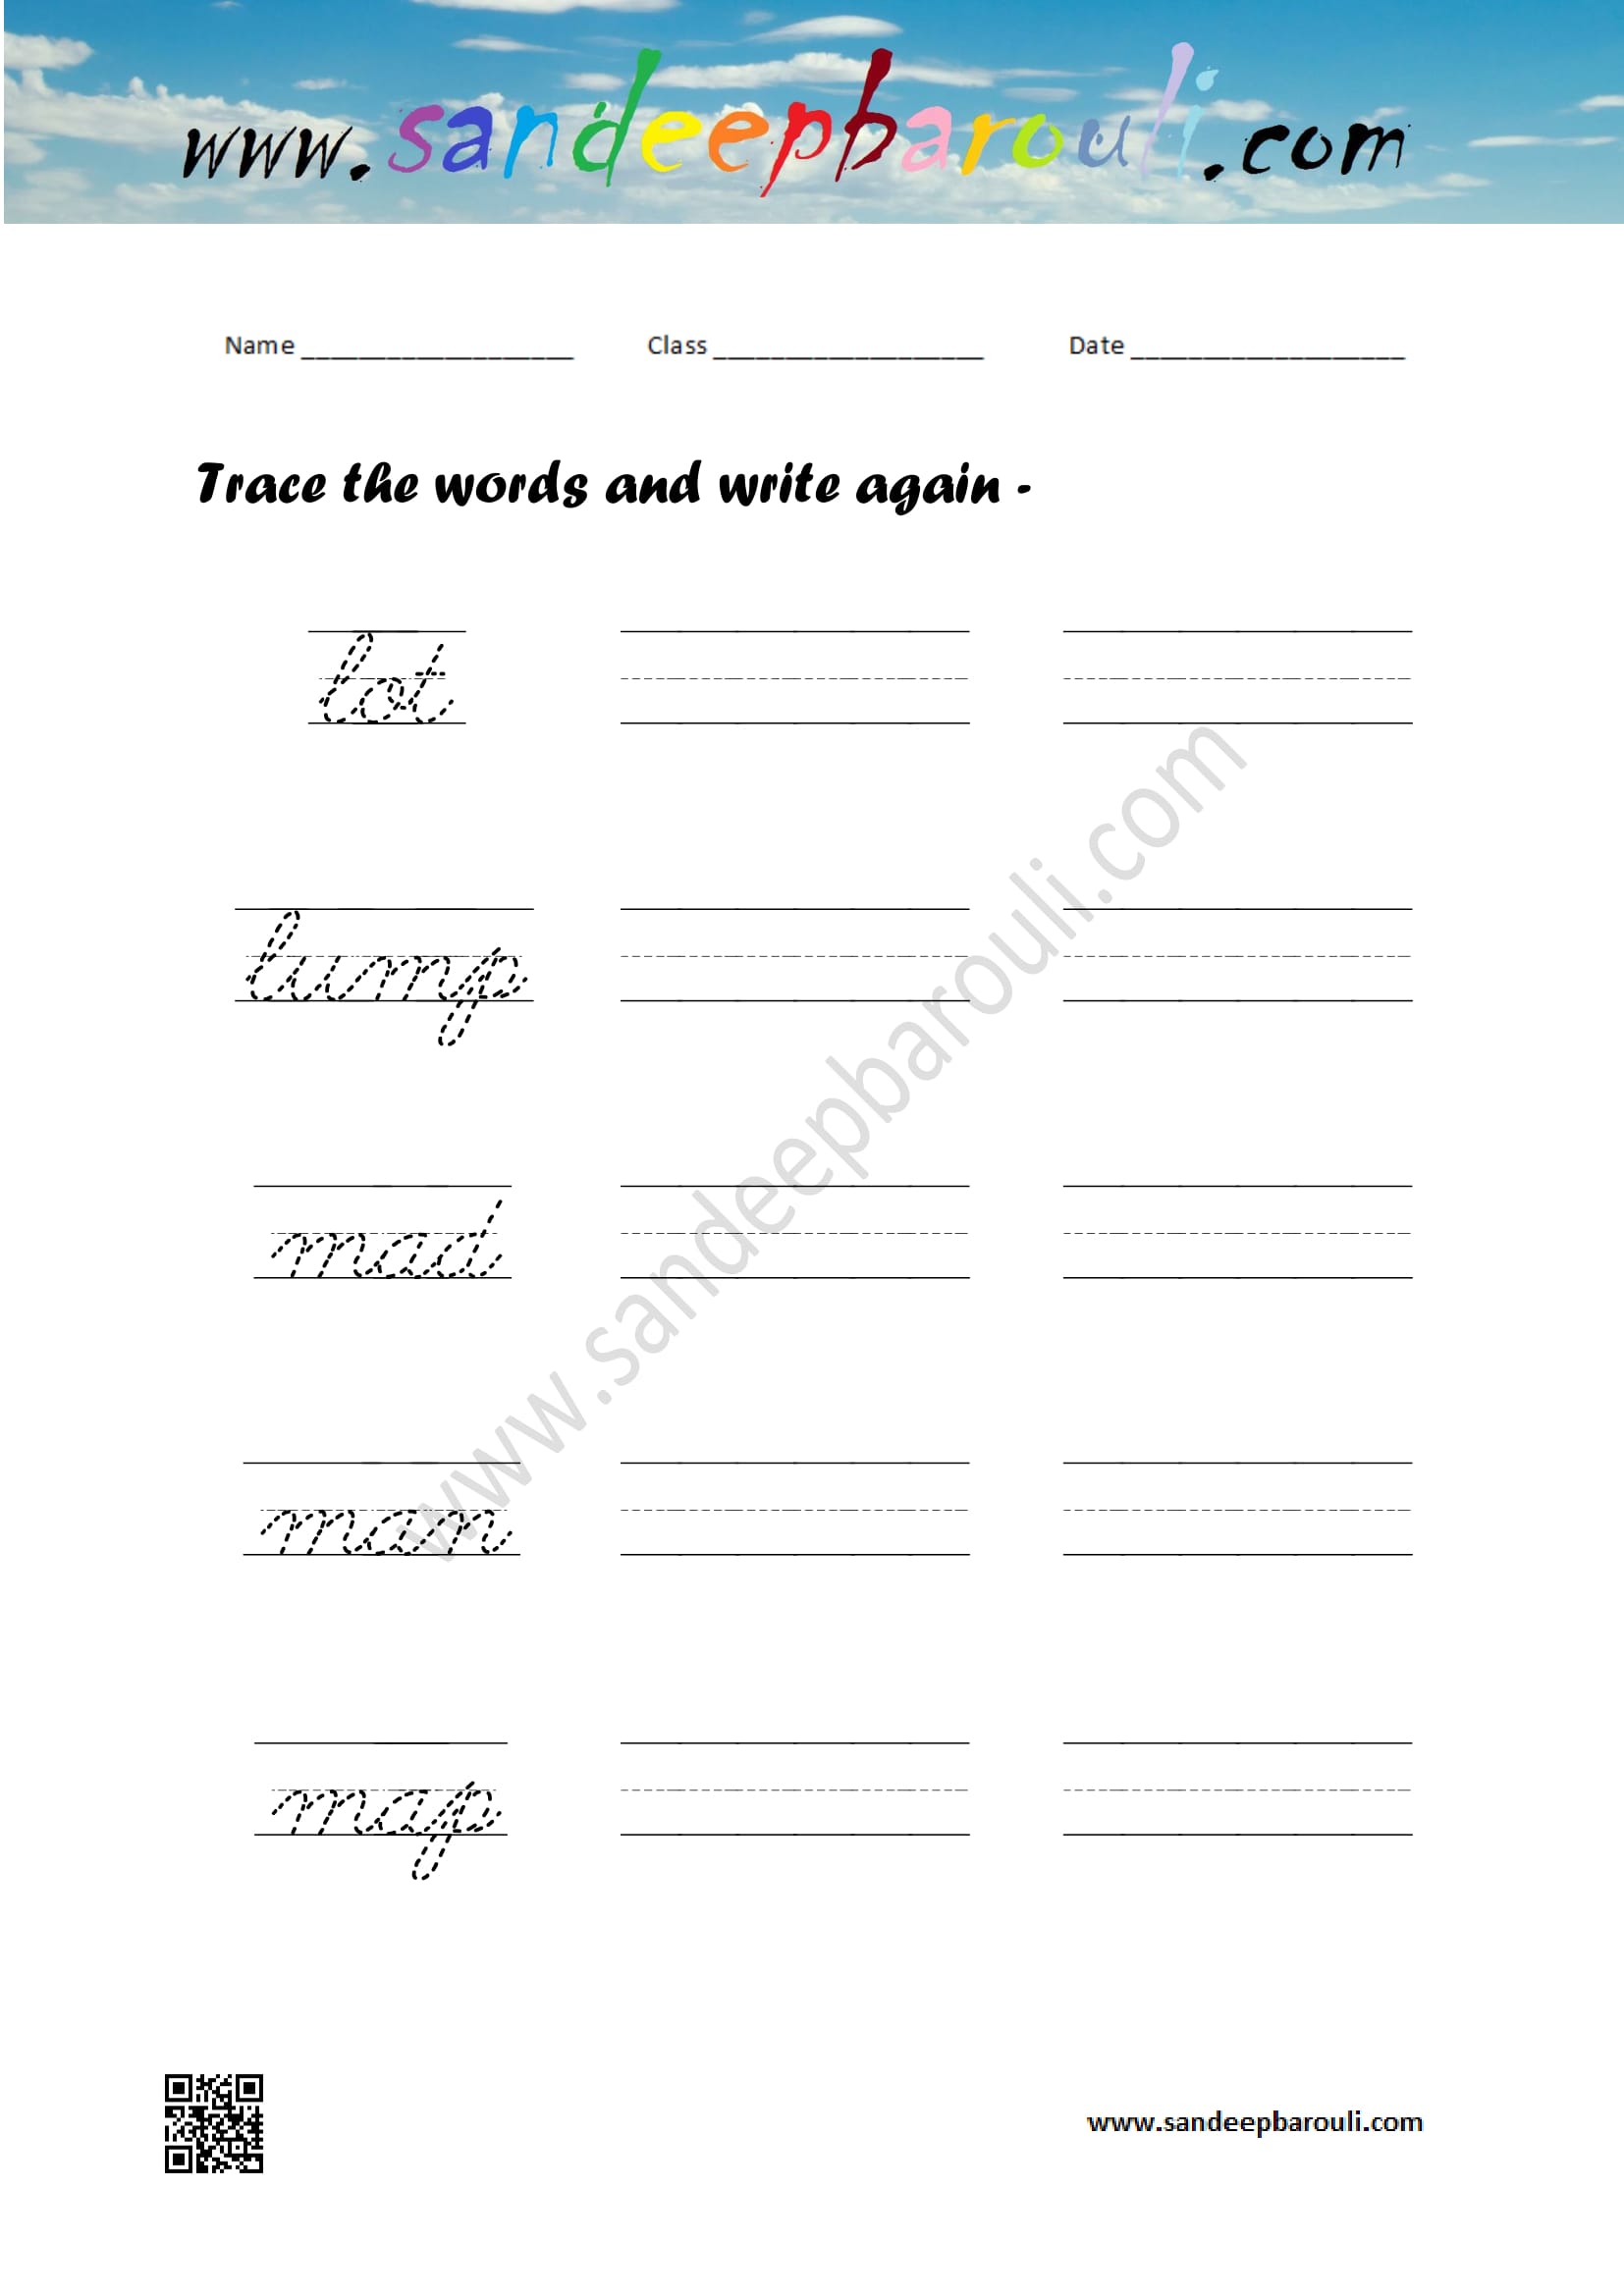 Cursive writing worksheet – trace the words and write again (16)